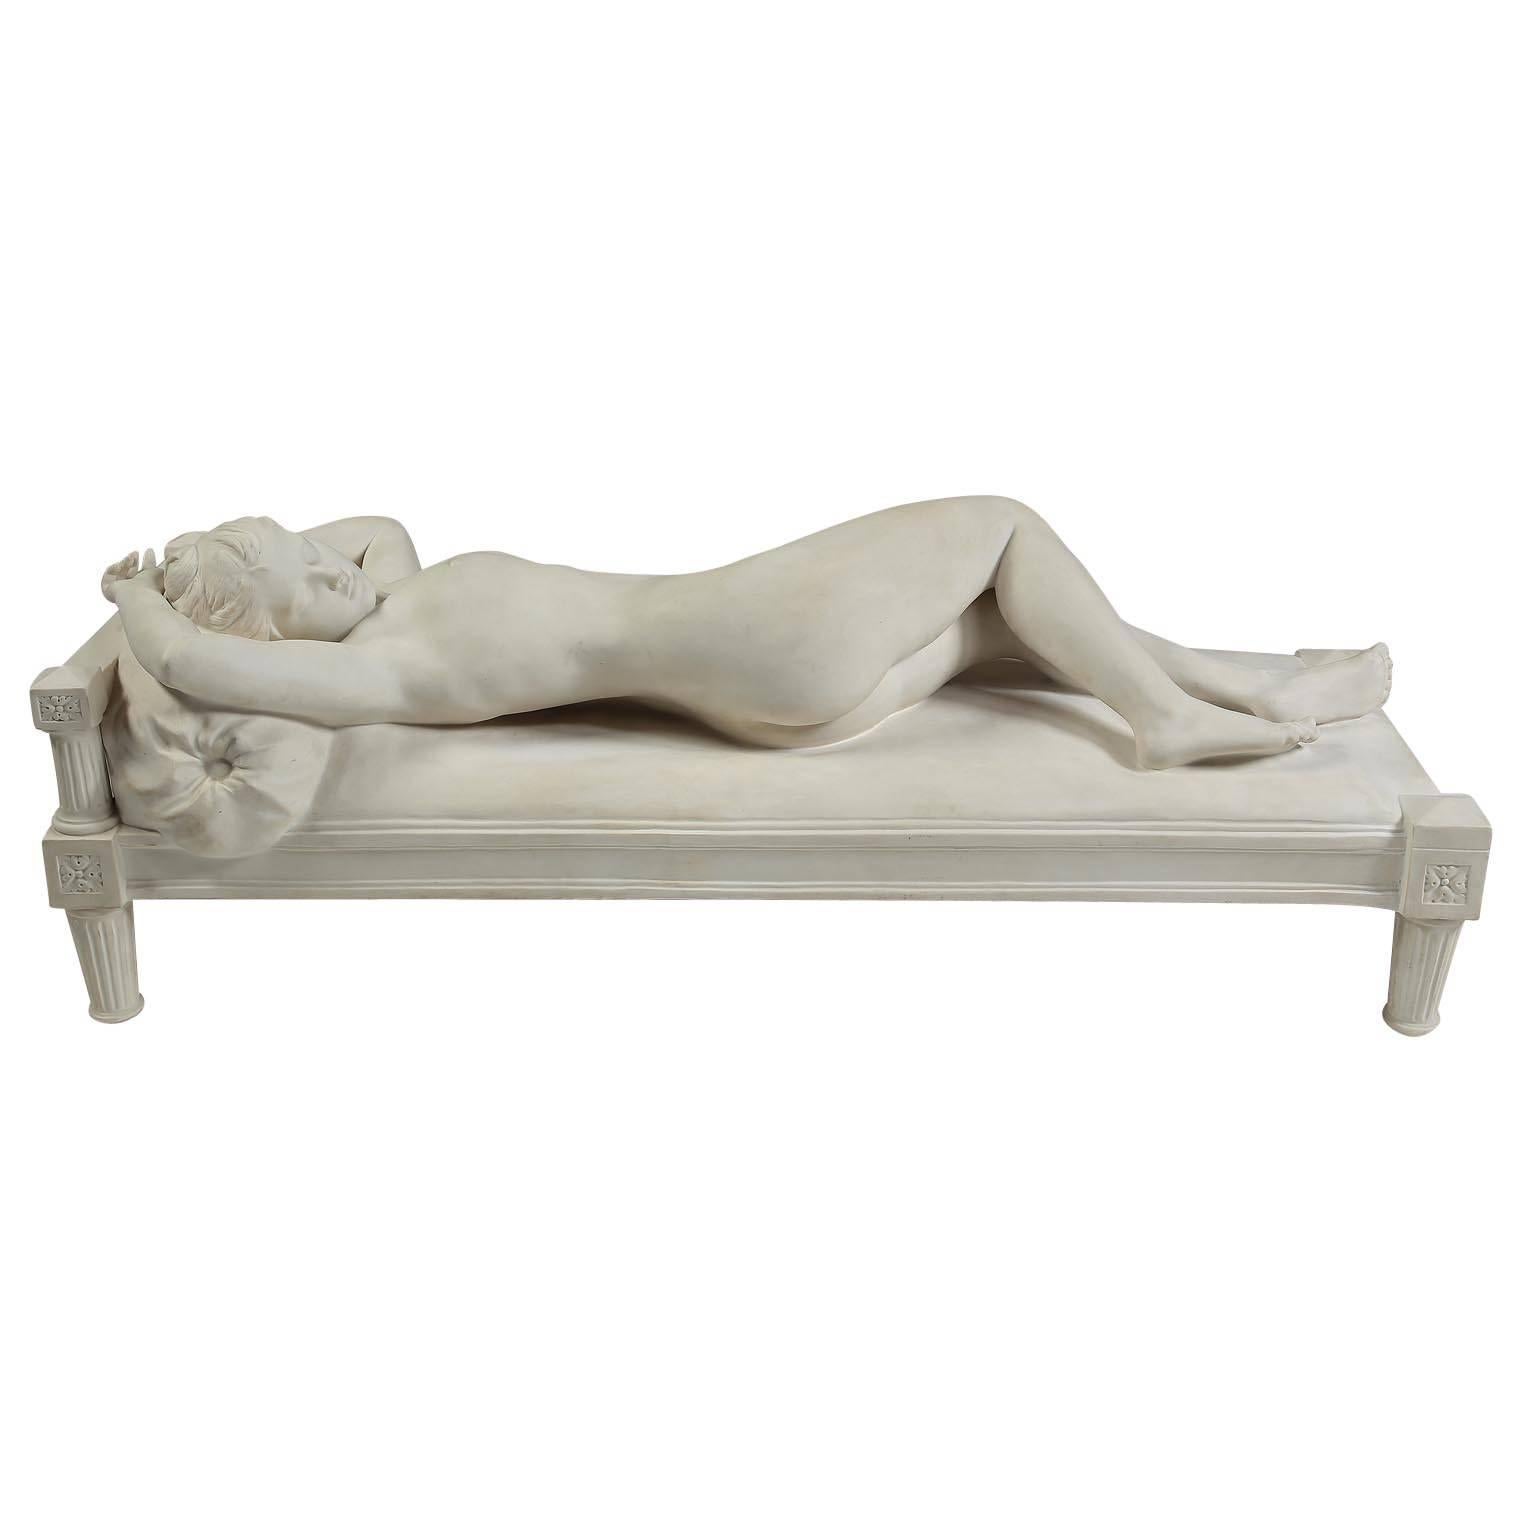 A very fine French Sevres biscuit (Bisc) porcelain figure of a recumbent nude lady titled 